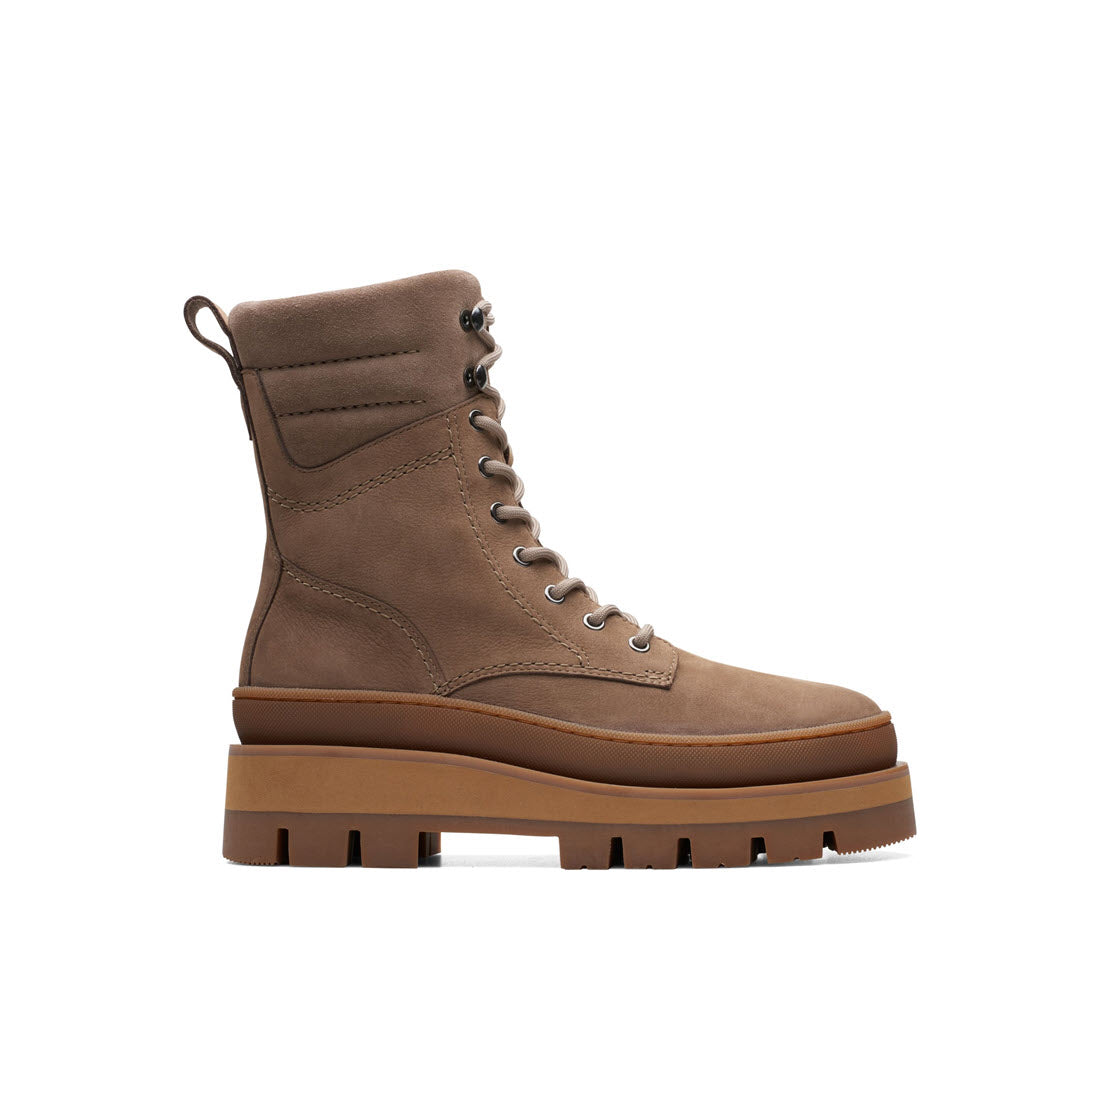 A brown leather Clarks Orianna 2 Hike pebble lace-up boot with a chunky lugged sole, isolated on a white background.